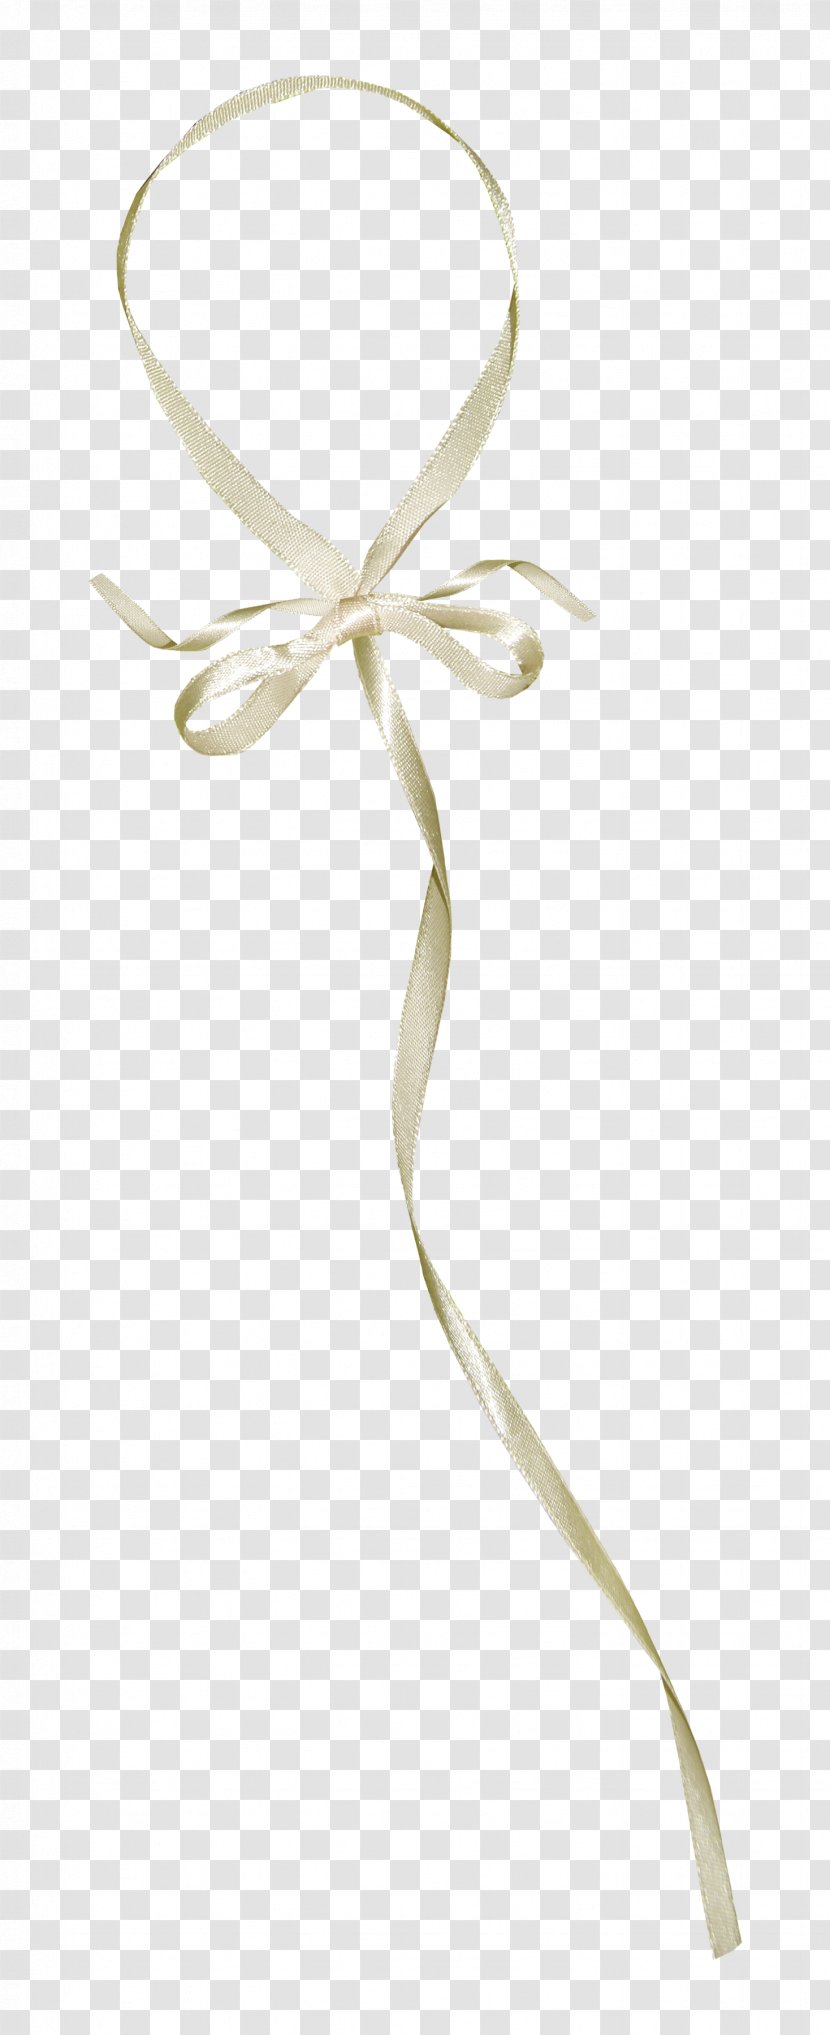 Paper Ribbon Shoelace Knot - Gold Bow Transparent PNG